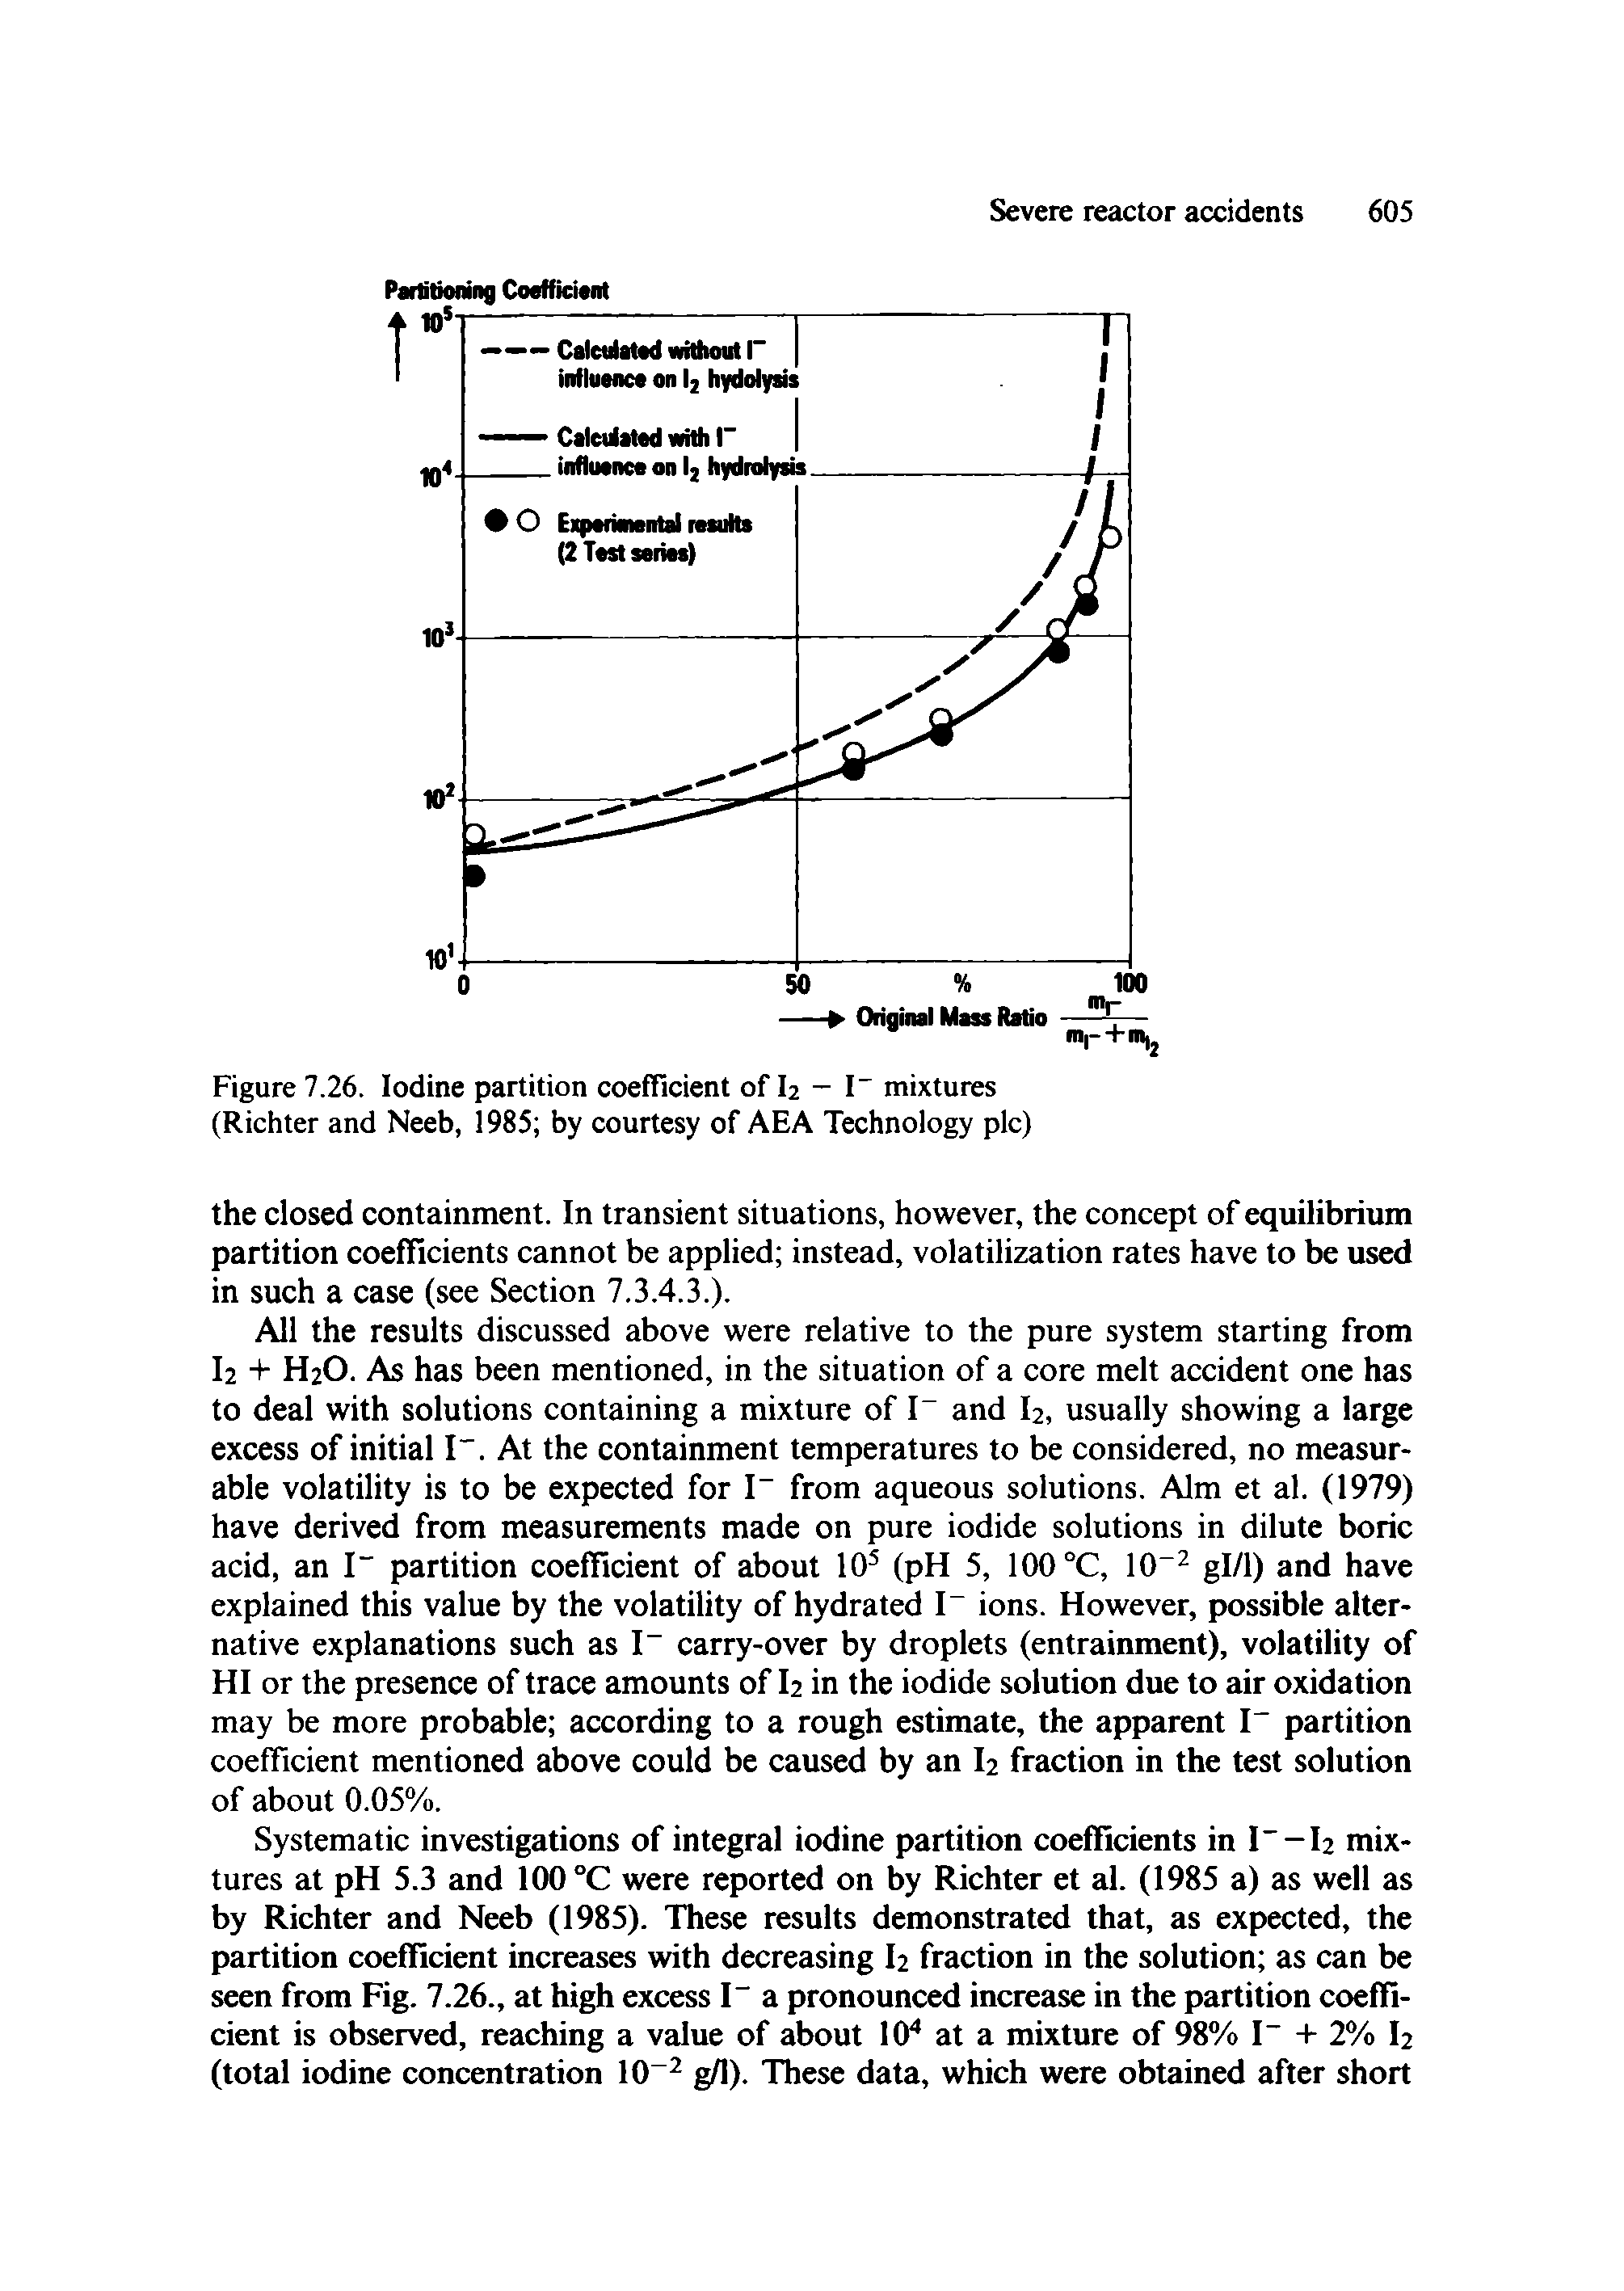 Figure 7.26. Iodine partition coefficient of I2 - I" mixtures (Richter and Neeb, 1985 by courtesy of AEA Technology pic)...